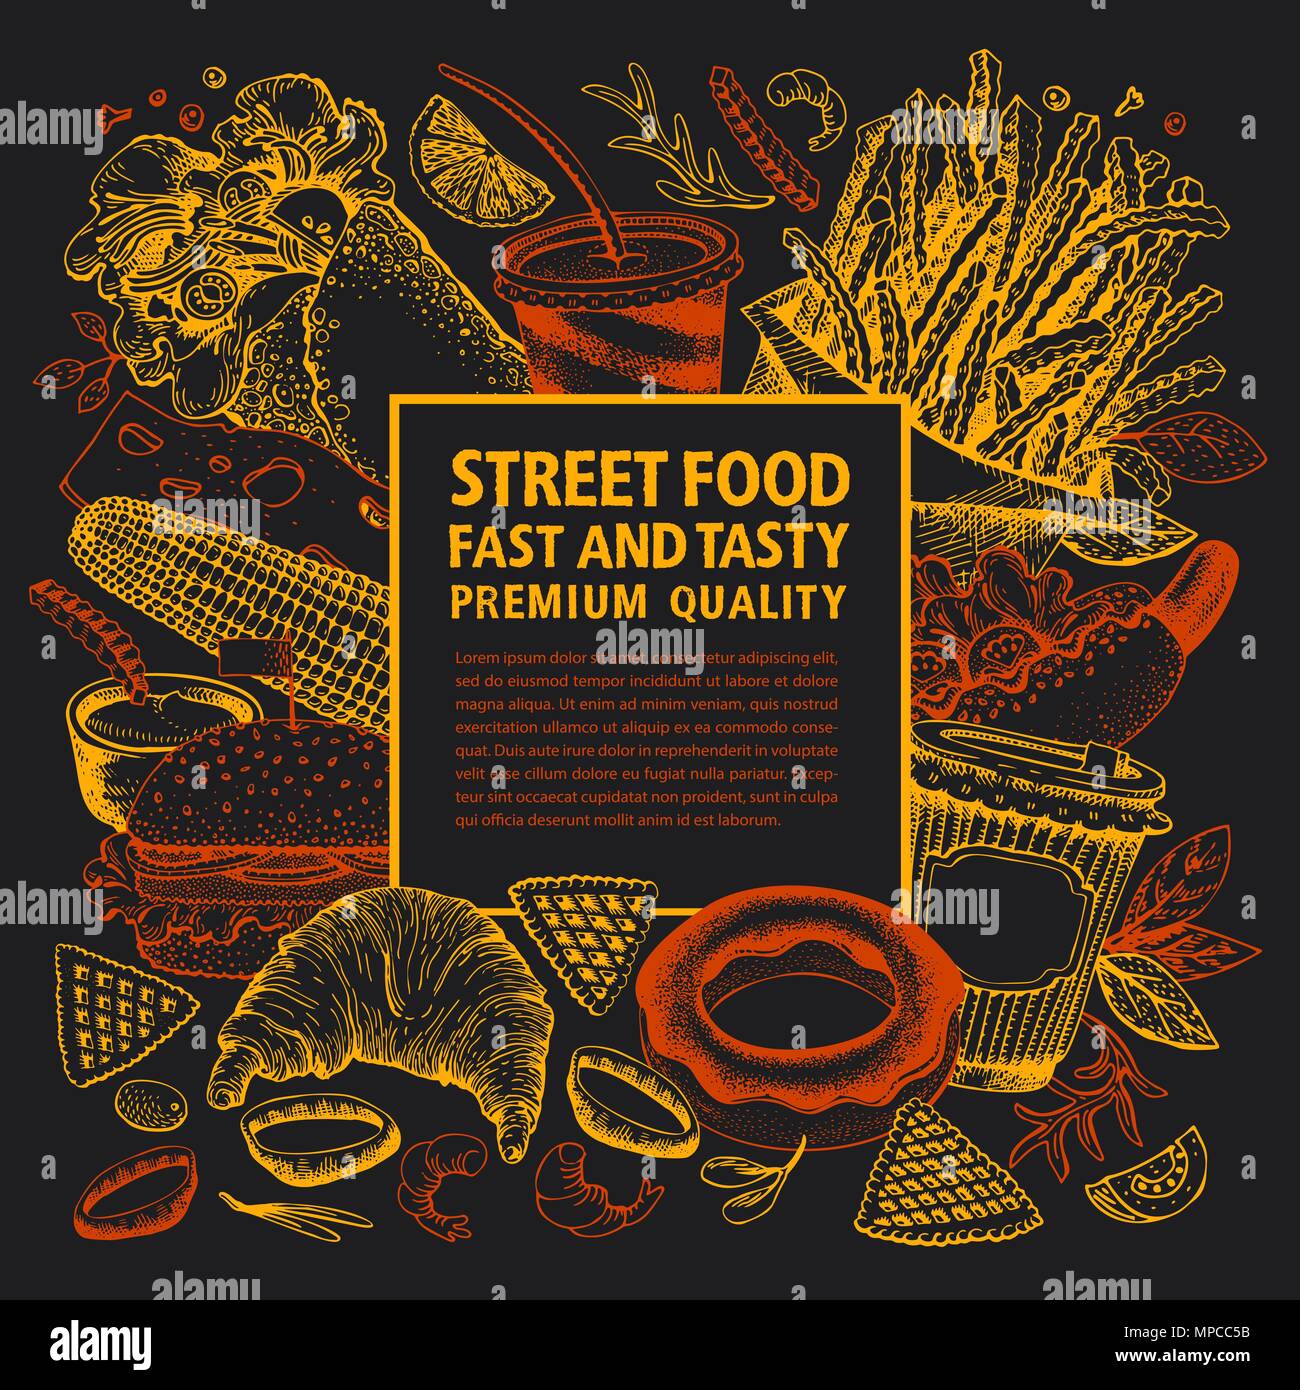 Fast food hand drawn vector illustration. Street food banner design template. Can be use for fast food restaurant or cafe menu or packaging design. Stock Vector